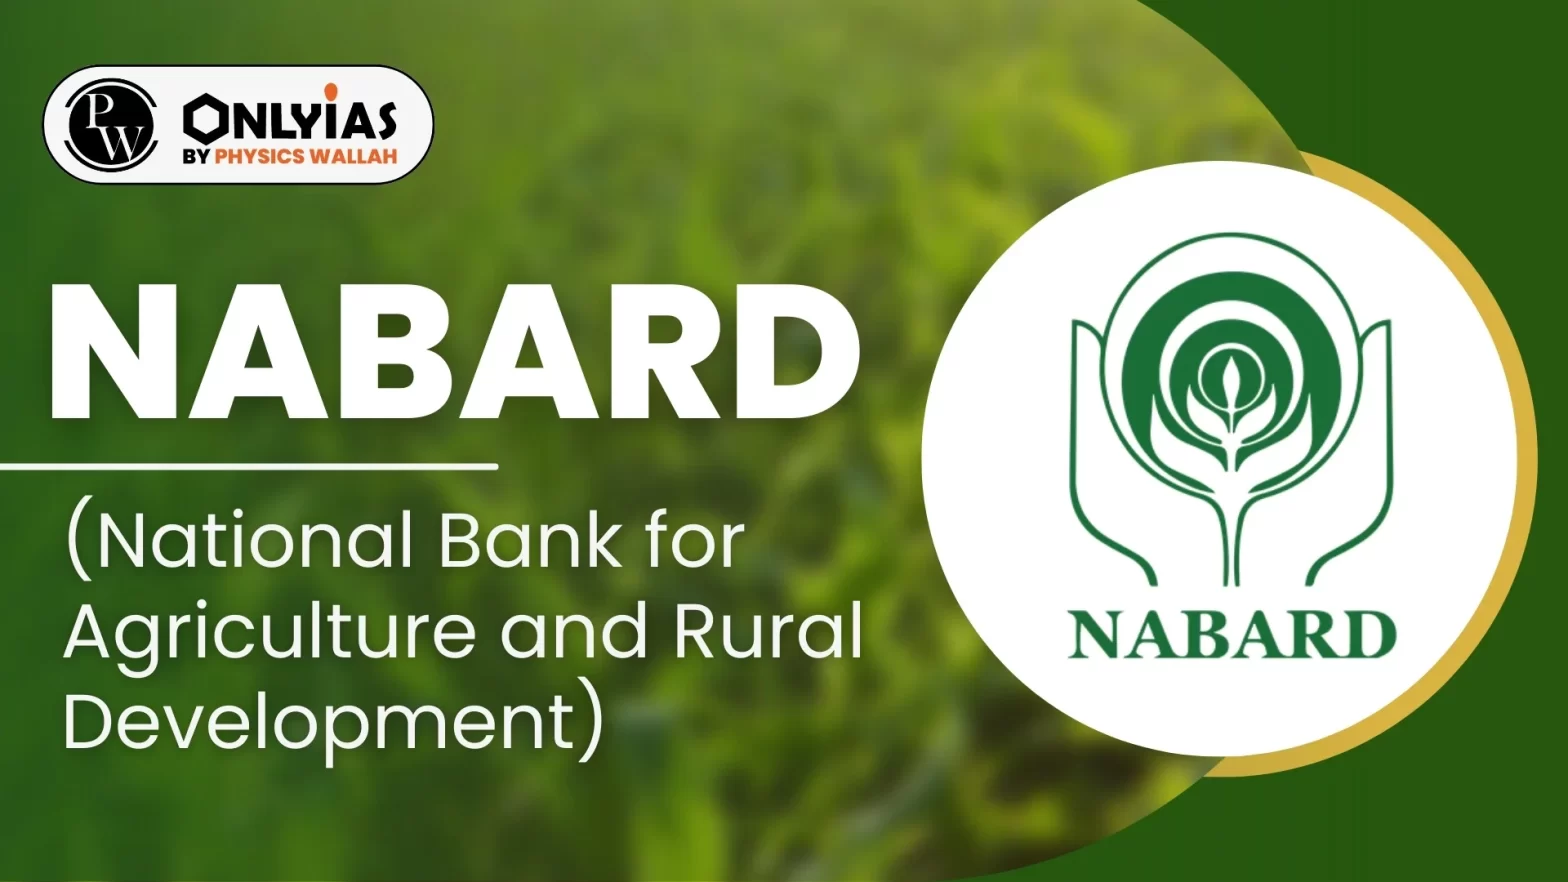 NABARD: National Bank for Agriculture and Rural Development